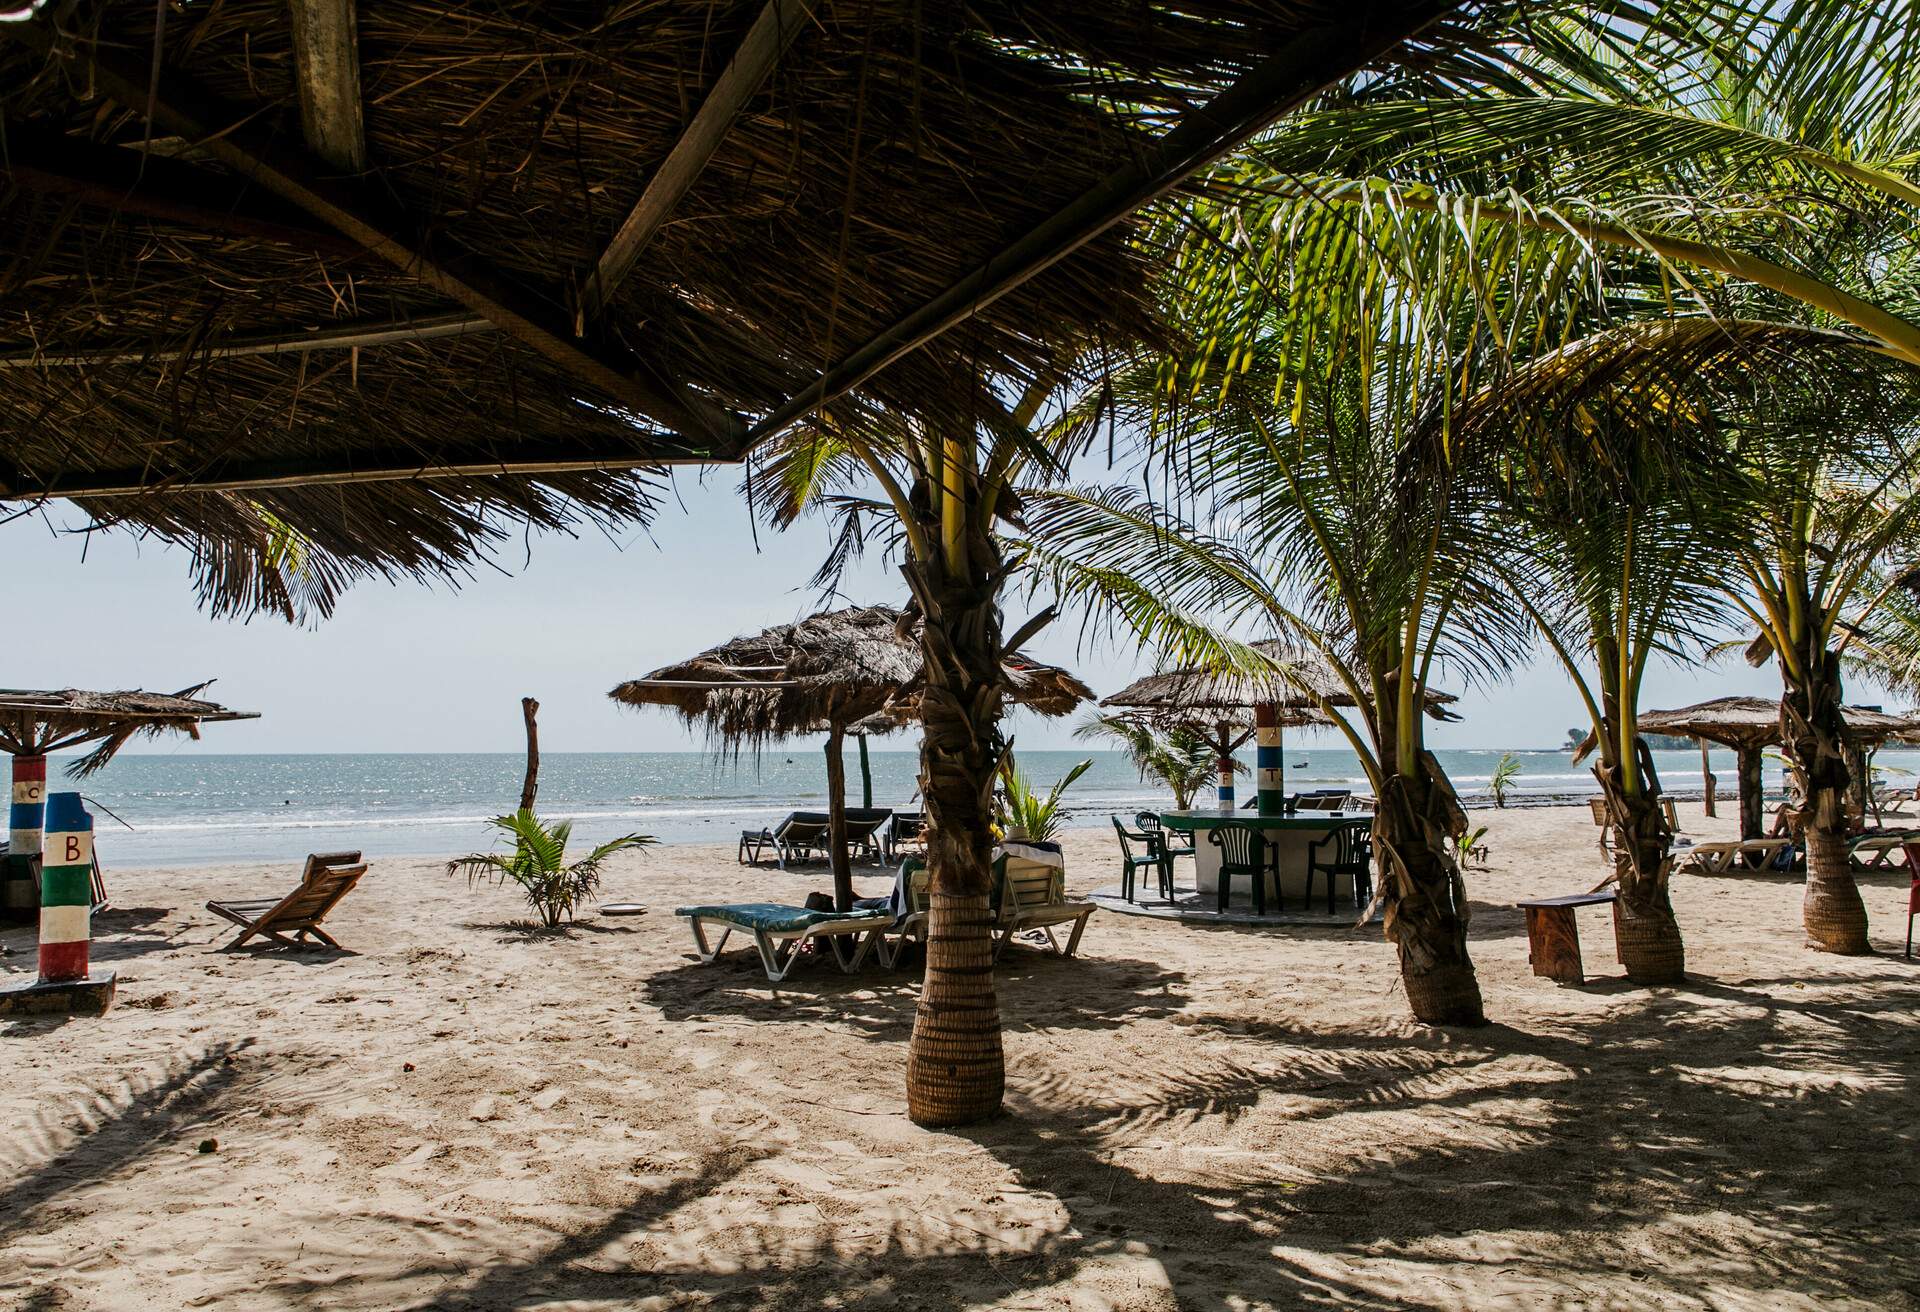 Palm trees and wooden umbrellas waiting to be taken by tourists in an empty Paradise Beach at the Sanyang area of Kombo coast of Gambia during a sunny day of September.